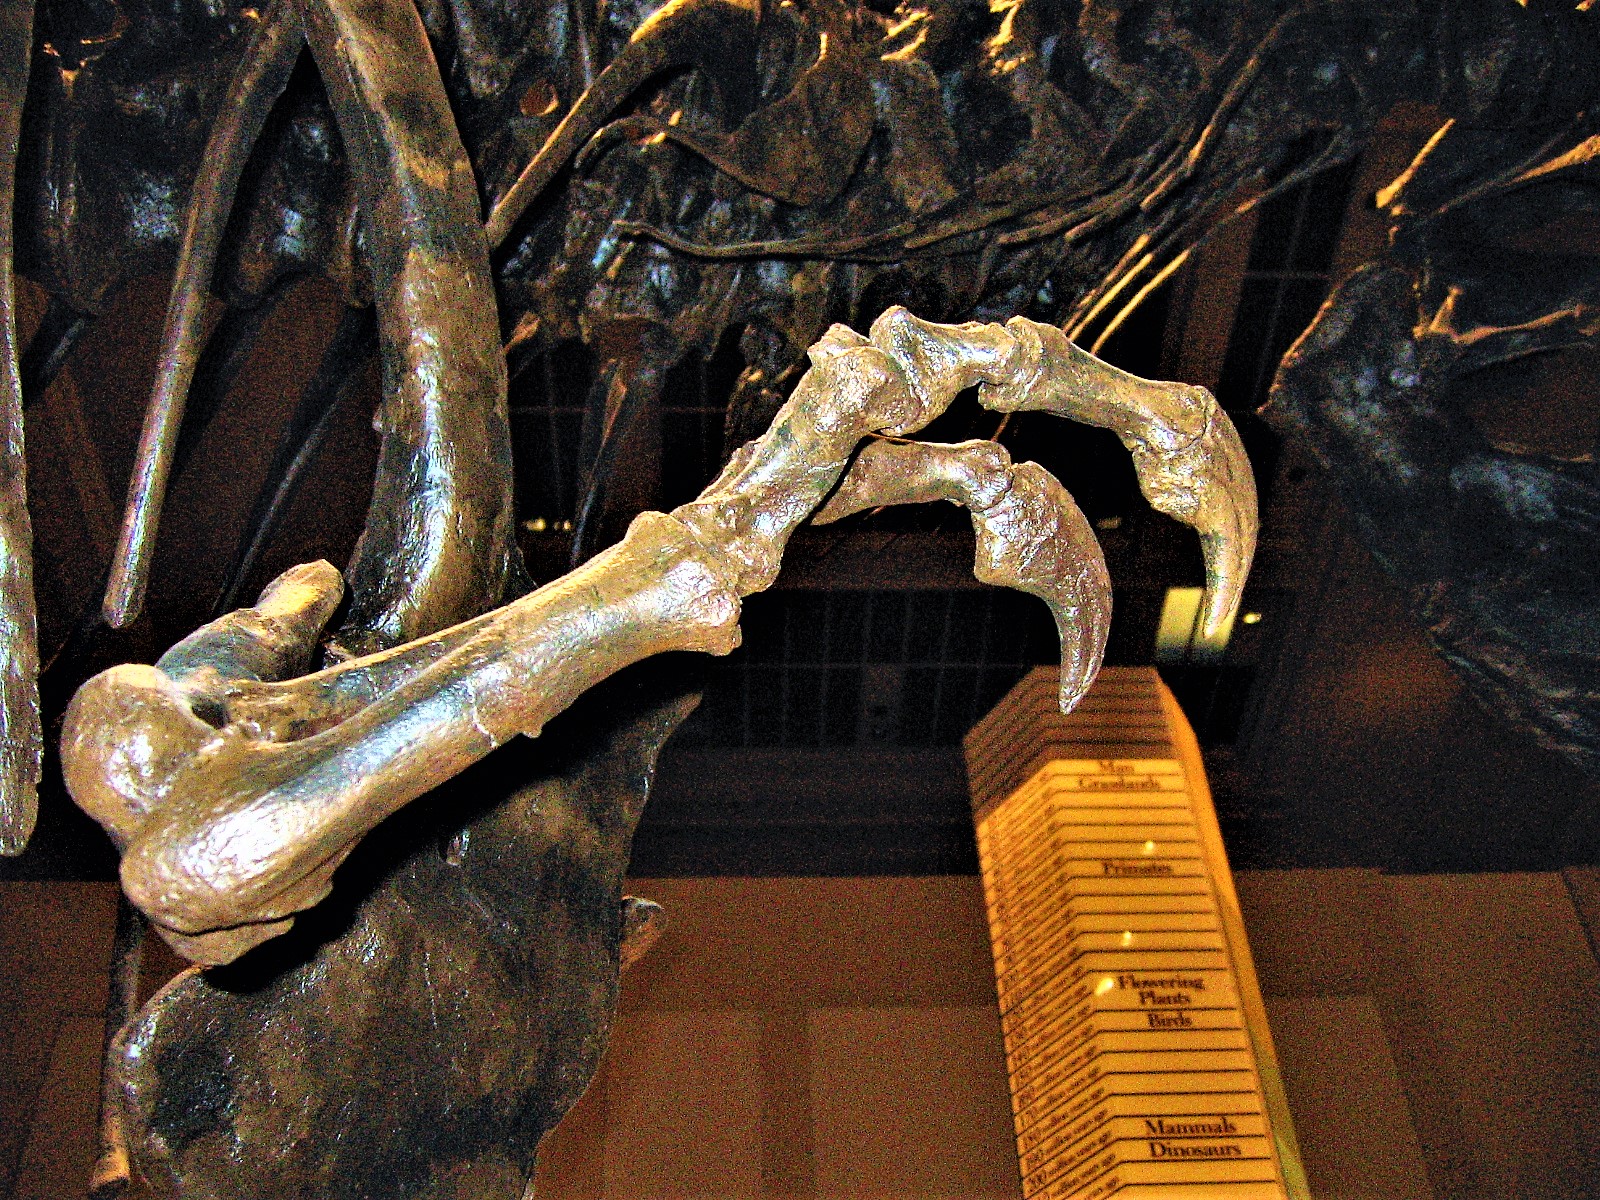 The short, but incredibly robust, arms of T-rex. (image credit: Wikimedia Commons)